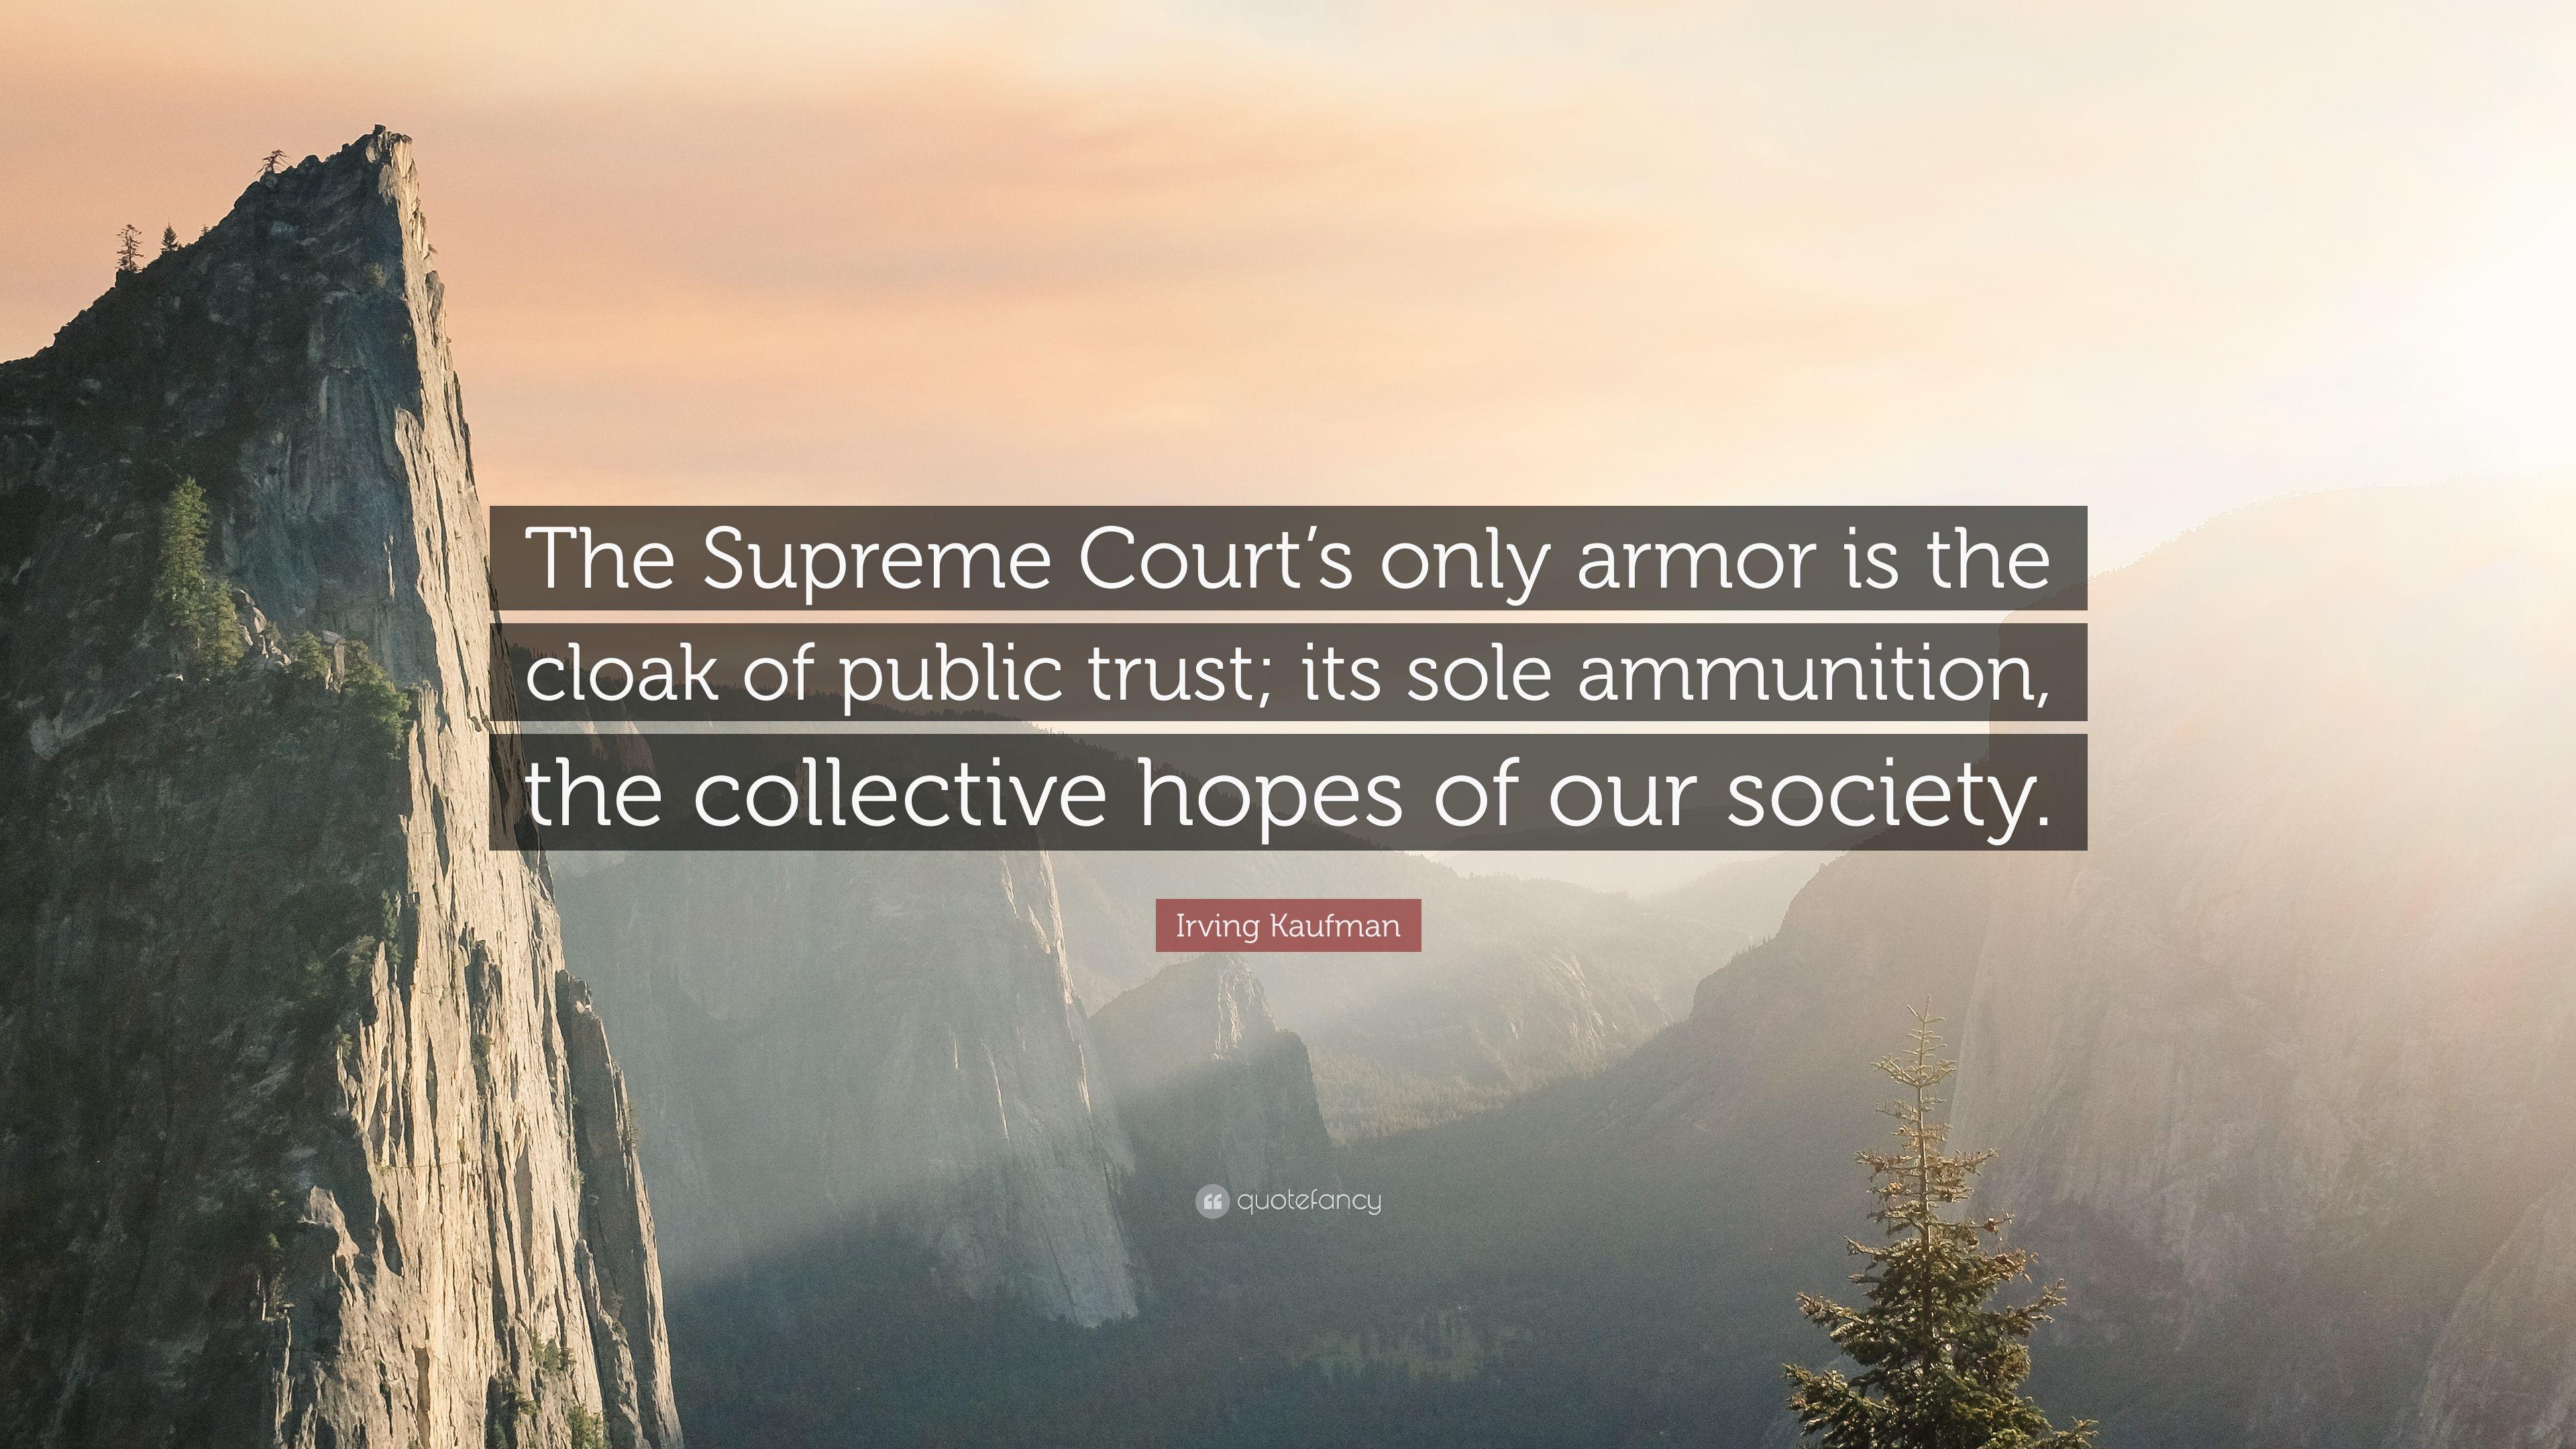 Irving Kaufman Quote: “The Supreme Court's only armor is the cloak